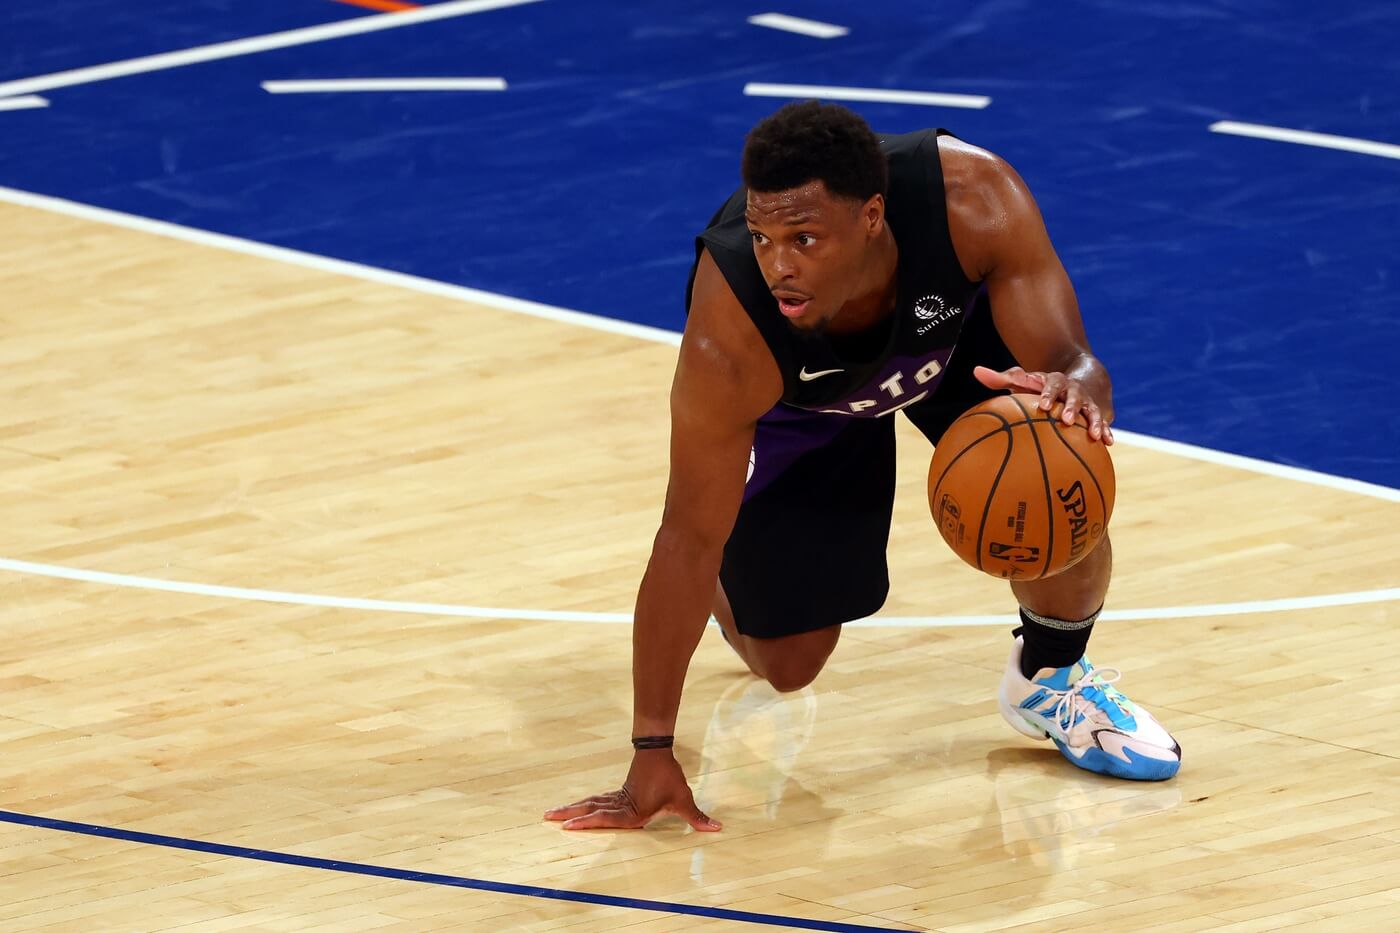 Apr 11, 2021; New York, New York, USA; Kyle Lowry #7 of the Toronto Raptors slips as he brings the ball up court against the New York Knicks during a game at Madison Square Garden. Mandatory Credit: Rich Schultz/POOL PHOTOS-USA TODAY Sports